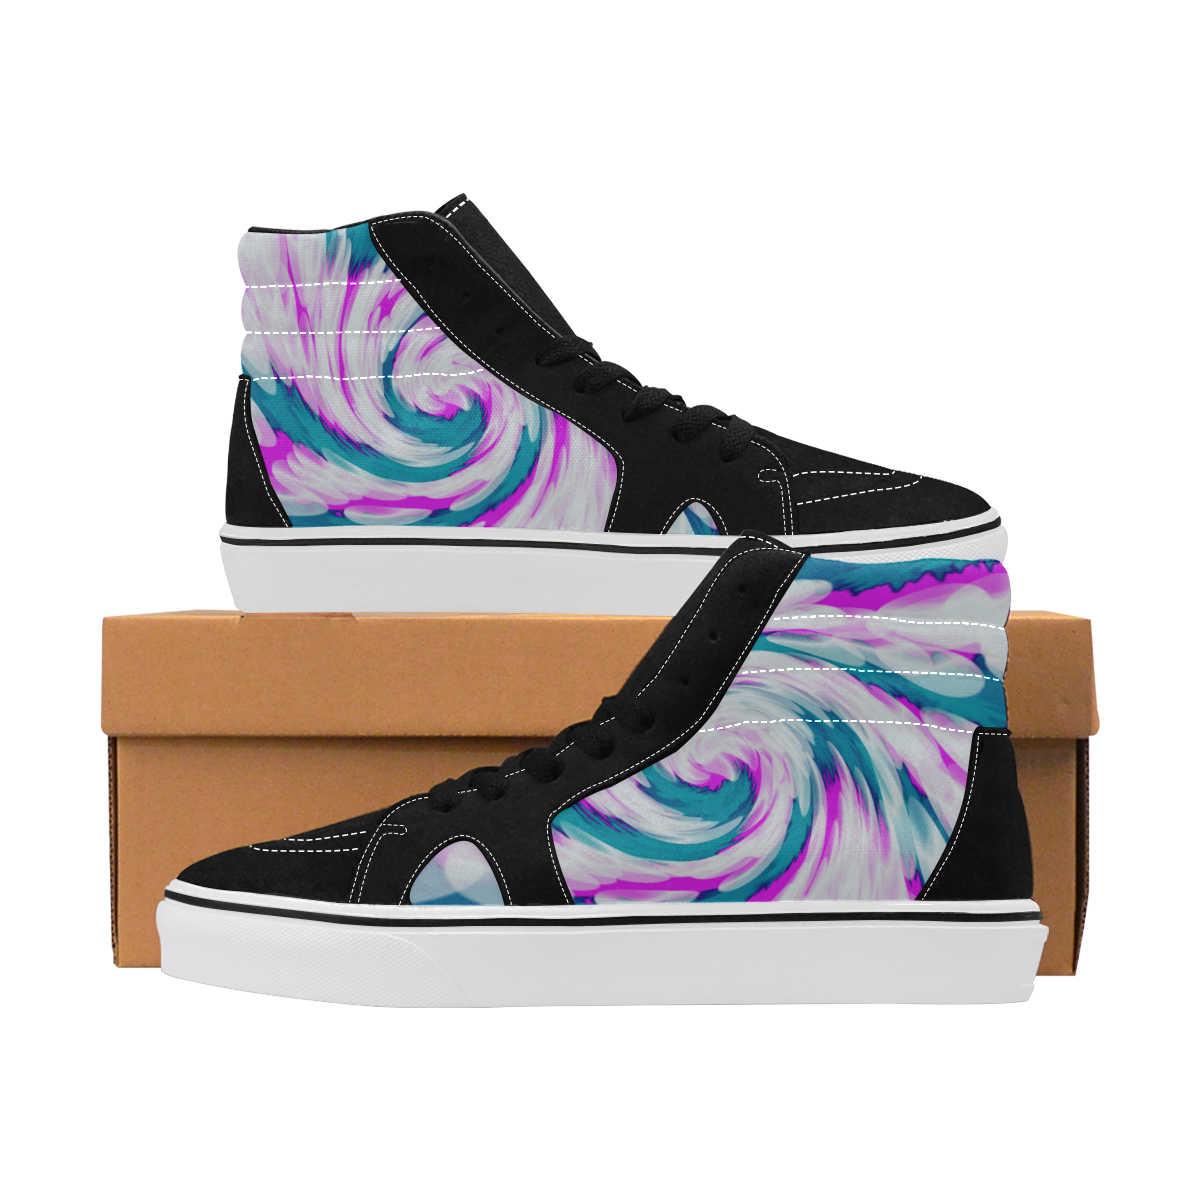 Turquoise Pink Tie Dye Swirl Abstract Women's High Top Skateboarding Shoes (Model E001-1)